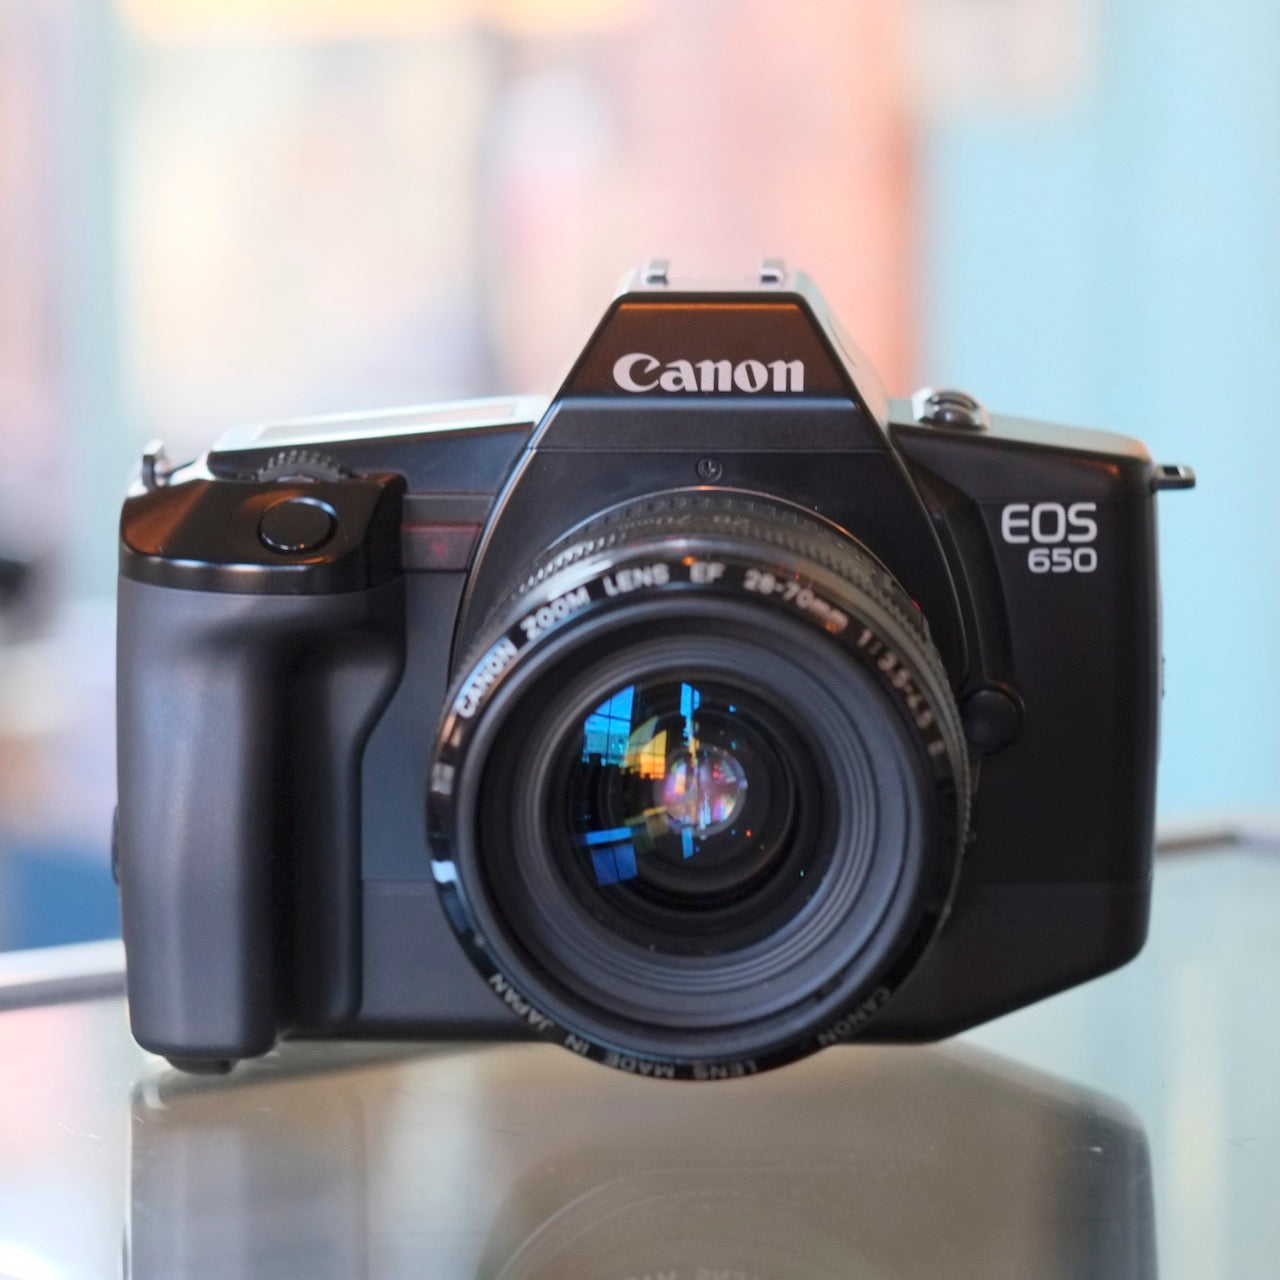 Canon EOS 650 with EF 28-70mm f3.5-4.5 II